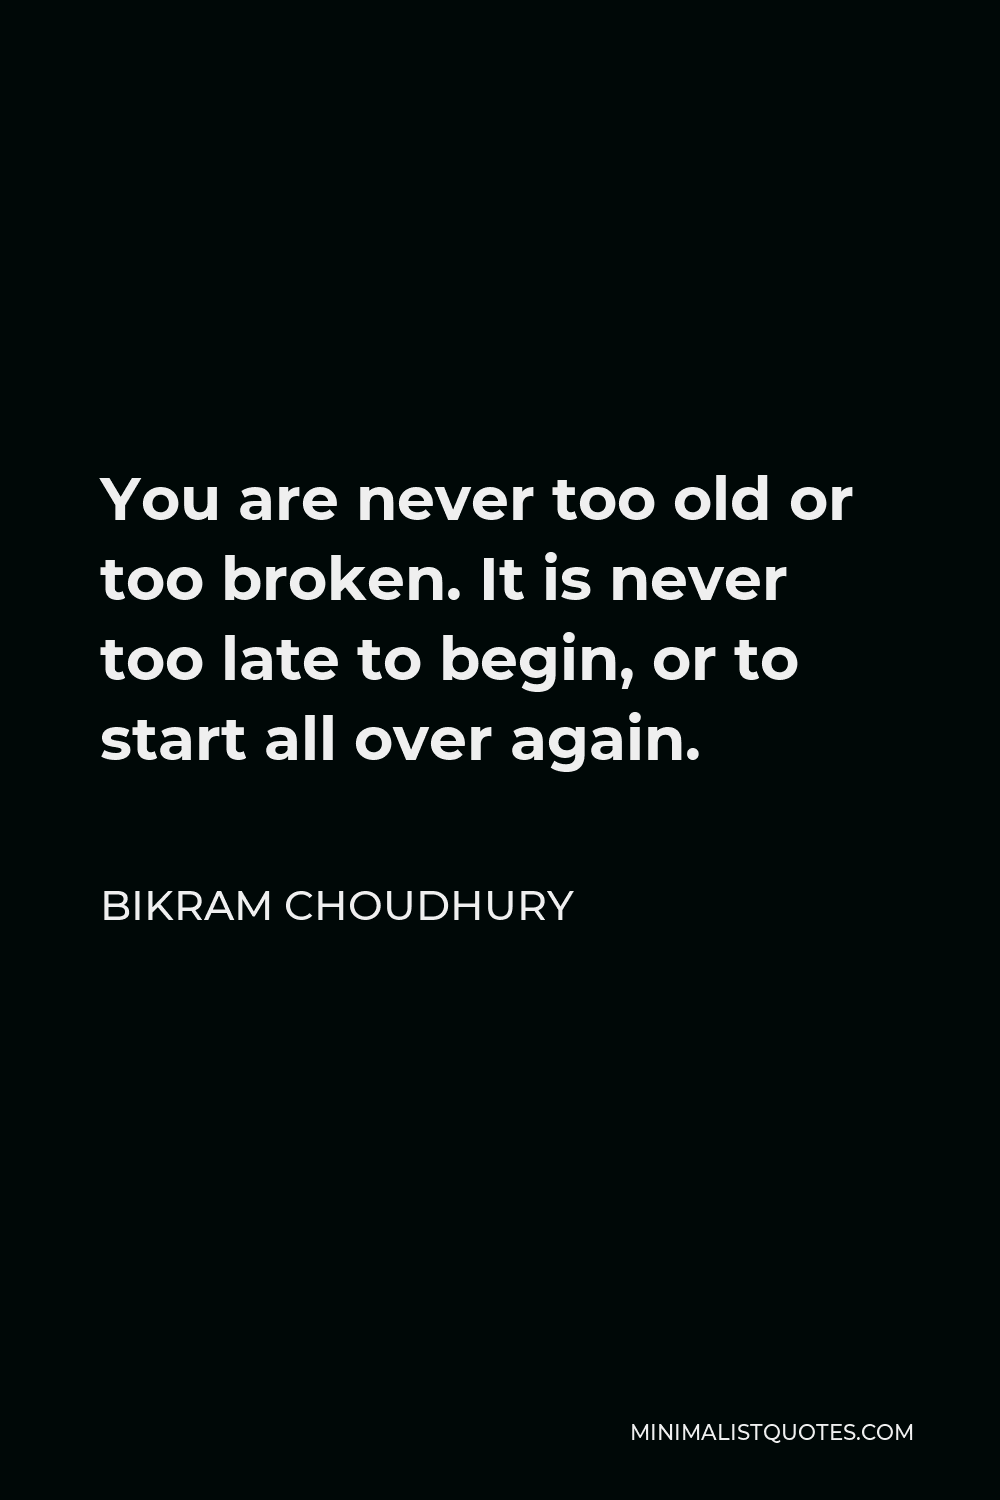 Bikram Choudhury Quote - You are never too old or too broken. It is never too late to begin, or to start all over again.